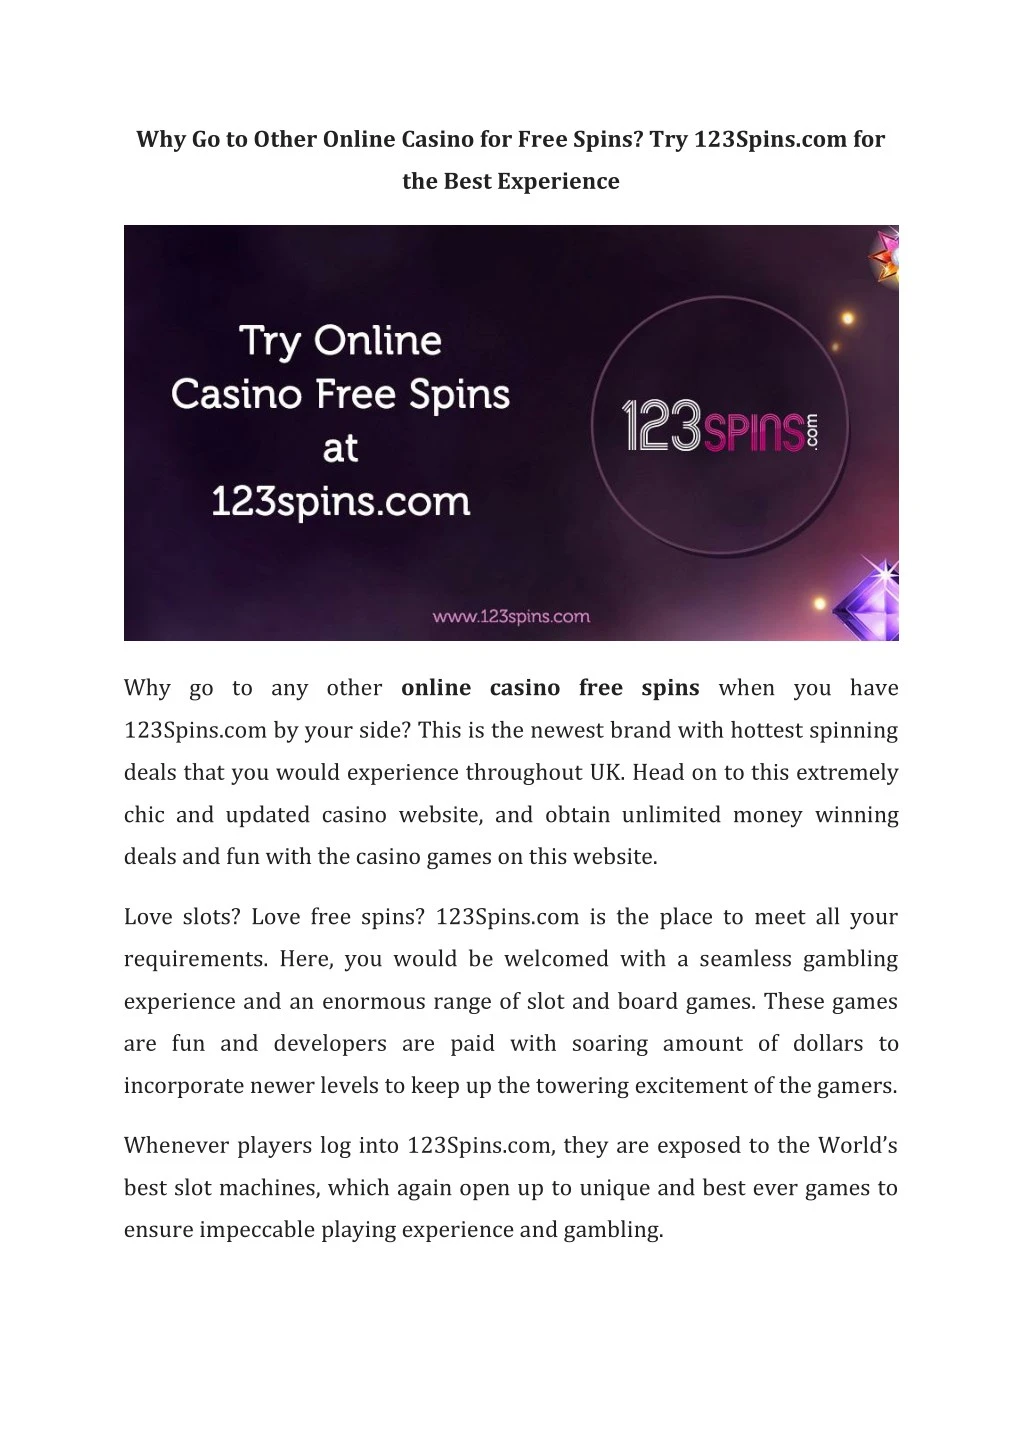 why go to other online casino for free spins